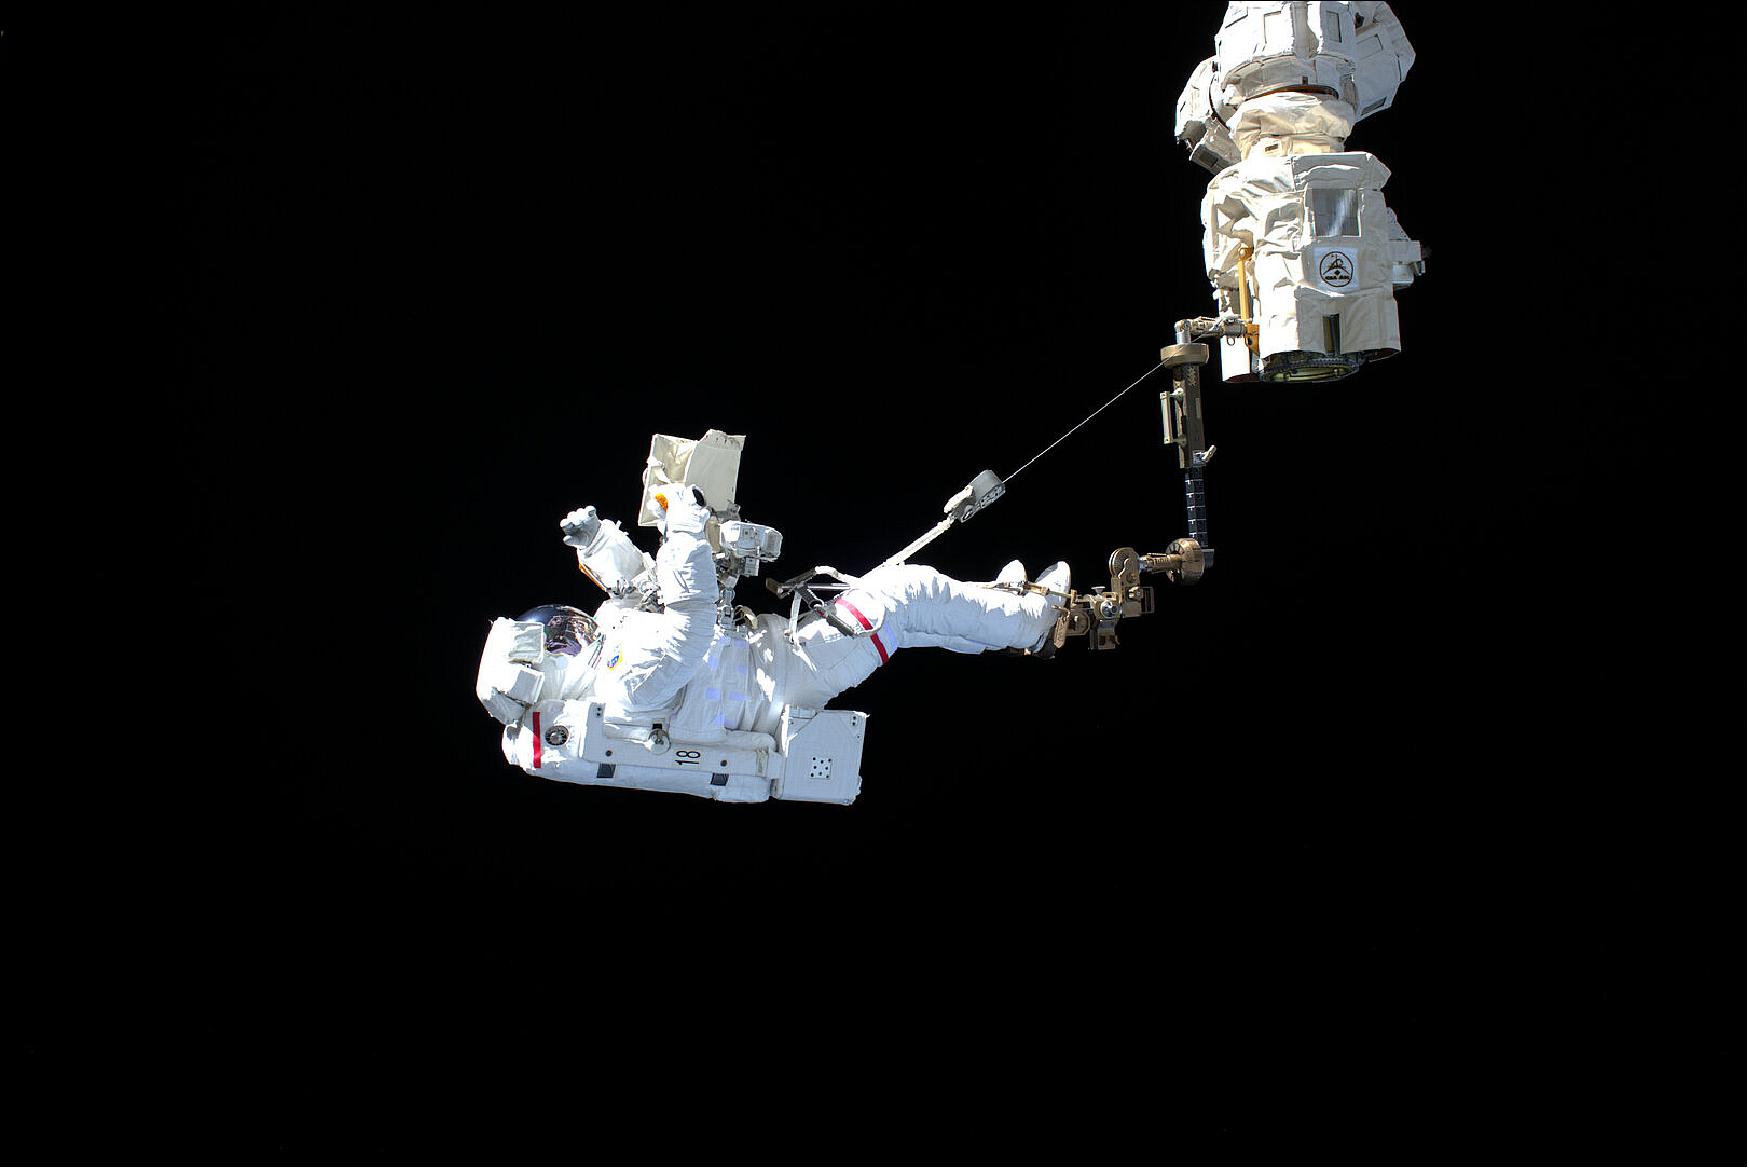 Figure 19: Luca Parmitano and NASA astronaut Drew Morgan left the depressurized Quest airlock at 13:10 CET (12:10 GMT), with Luca grabbing the ride to AMS on the robotic arm (Canadarm2) controlled by NASA astronaut Jessica Meir while Drew ferried handrails and equipment by hand to the worksite (image credit: ESA/NASA)